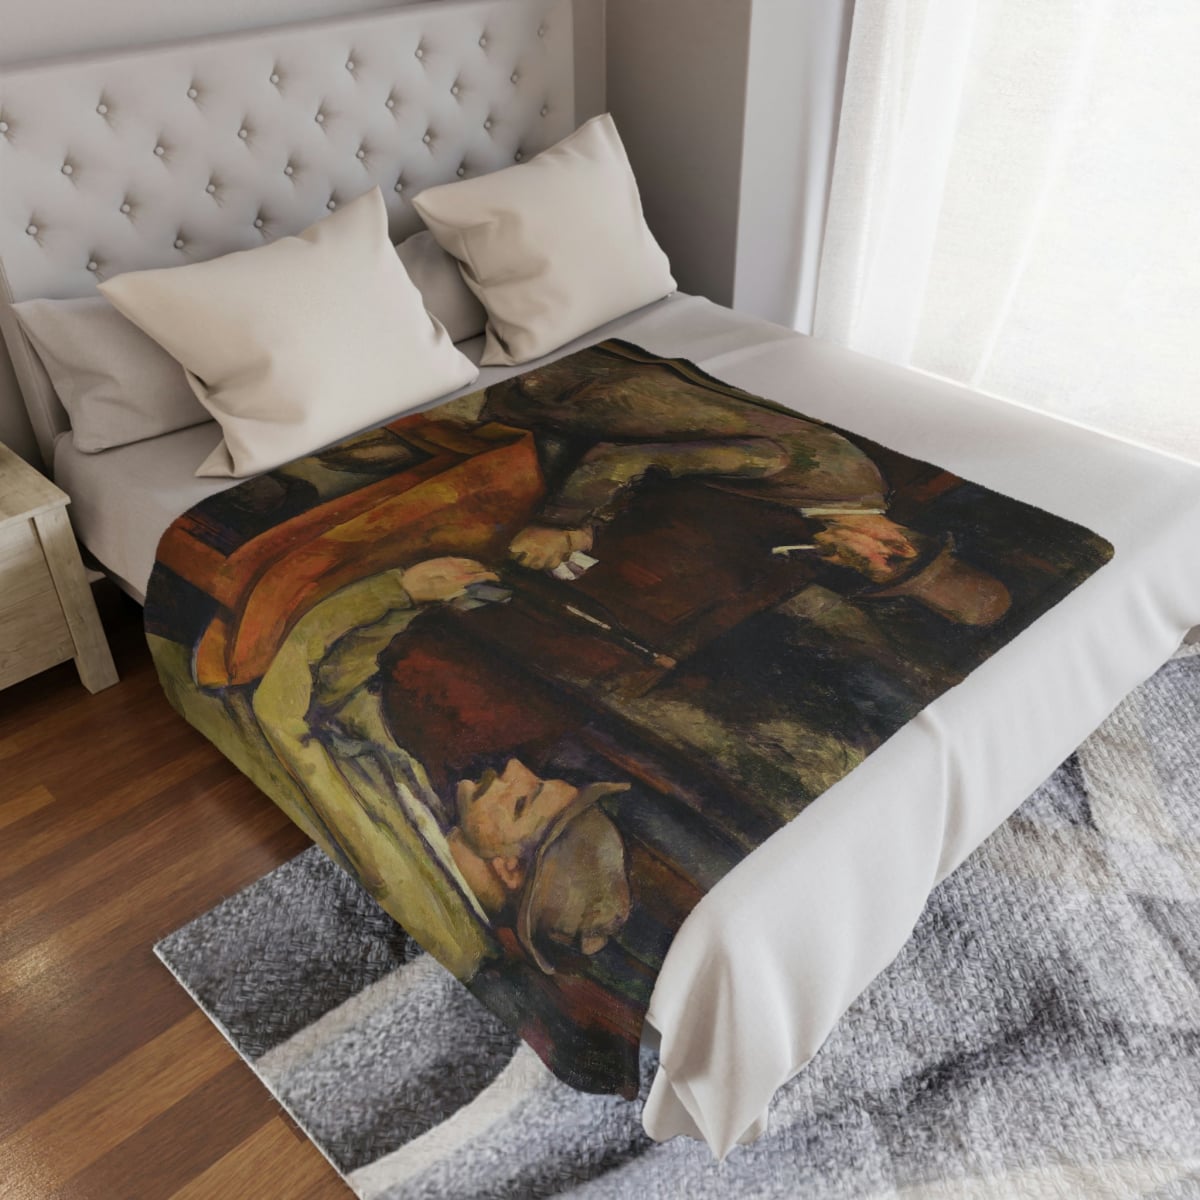 Home decor with Cézanne's timeless masterpiece